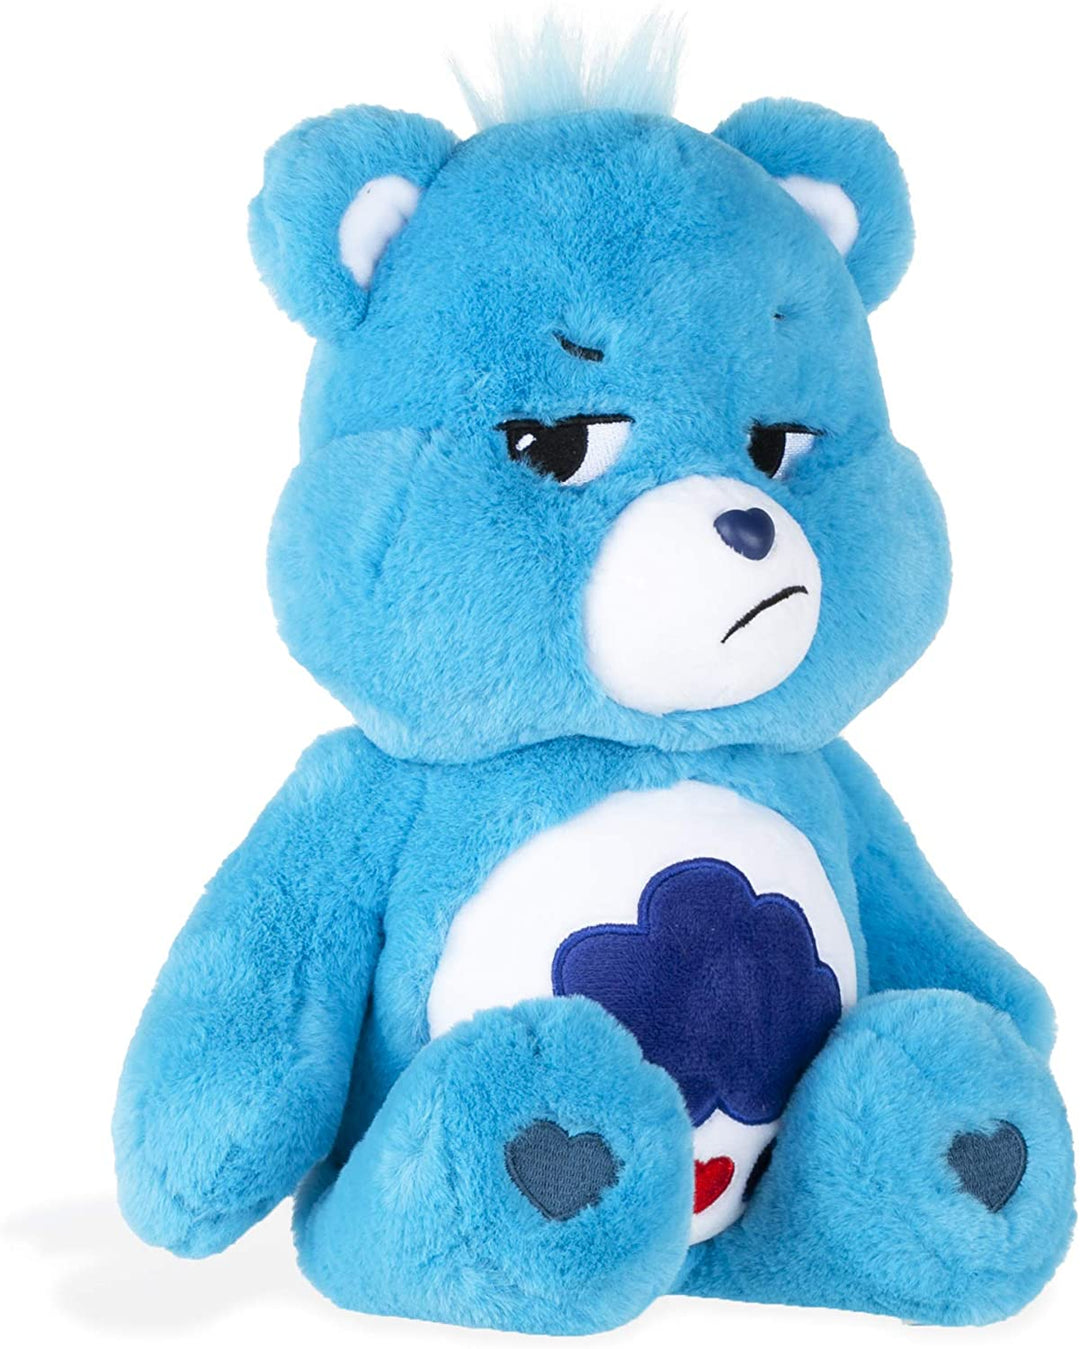 Care Bears 22062 14 Inch Medium Plush Grumpy Bear, Collectable Cute Plush Toy, Cuddly Toys for Children